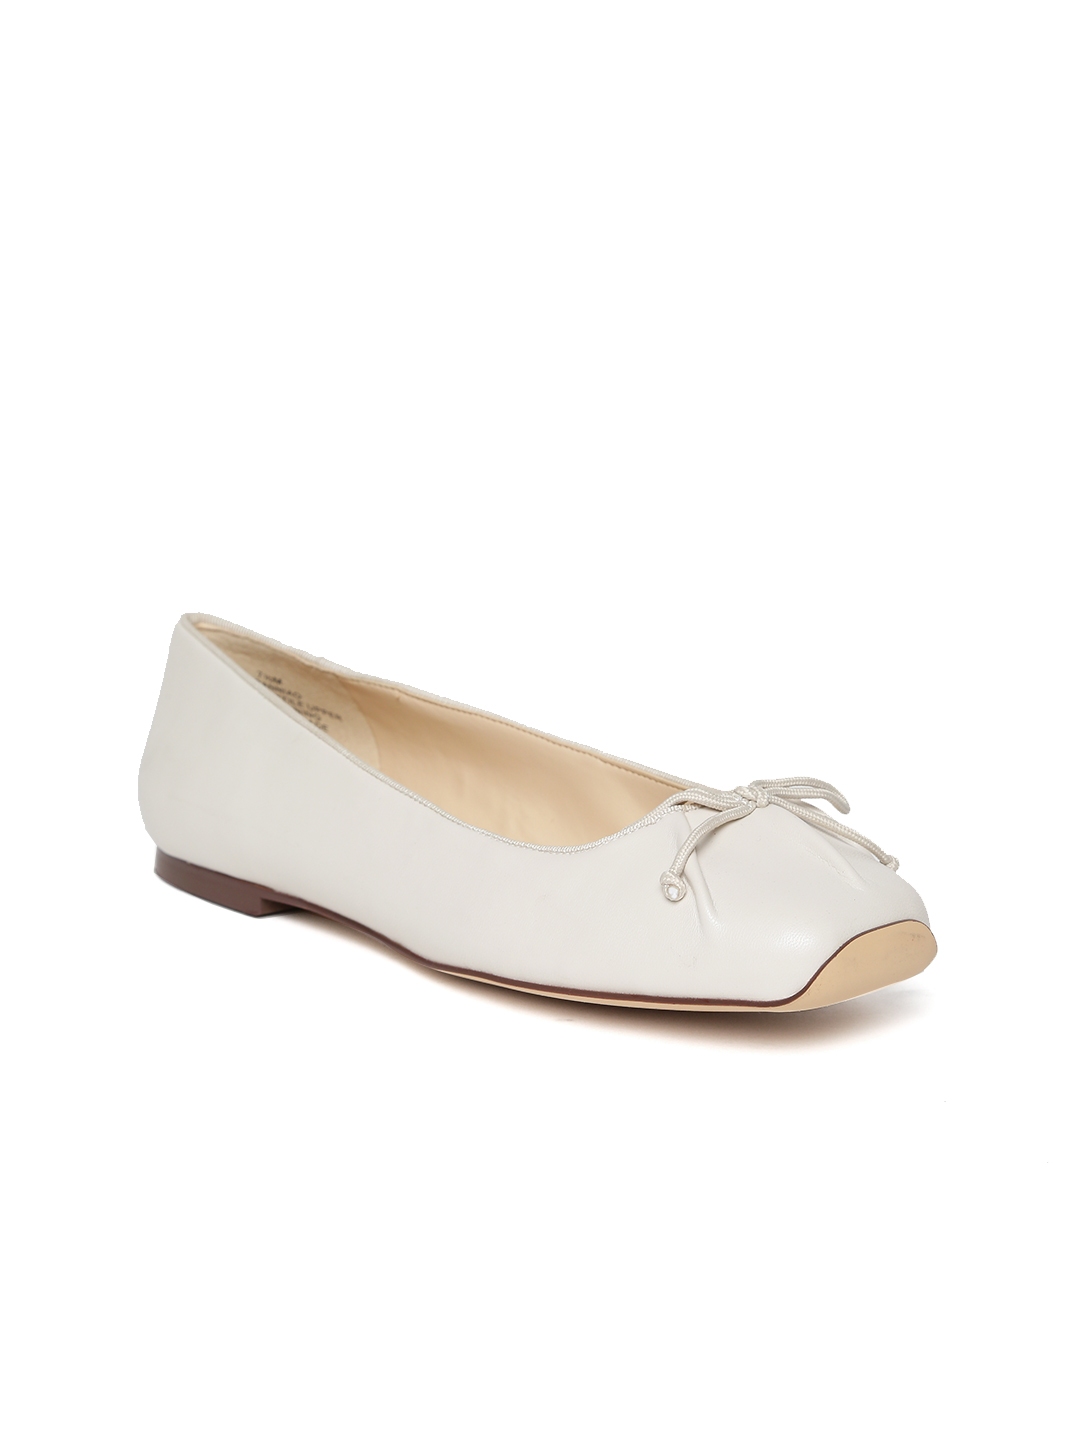 Buy Nine West Women Off White Solid Leather Ballerinas - Flats for ...